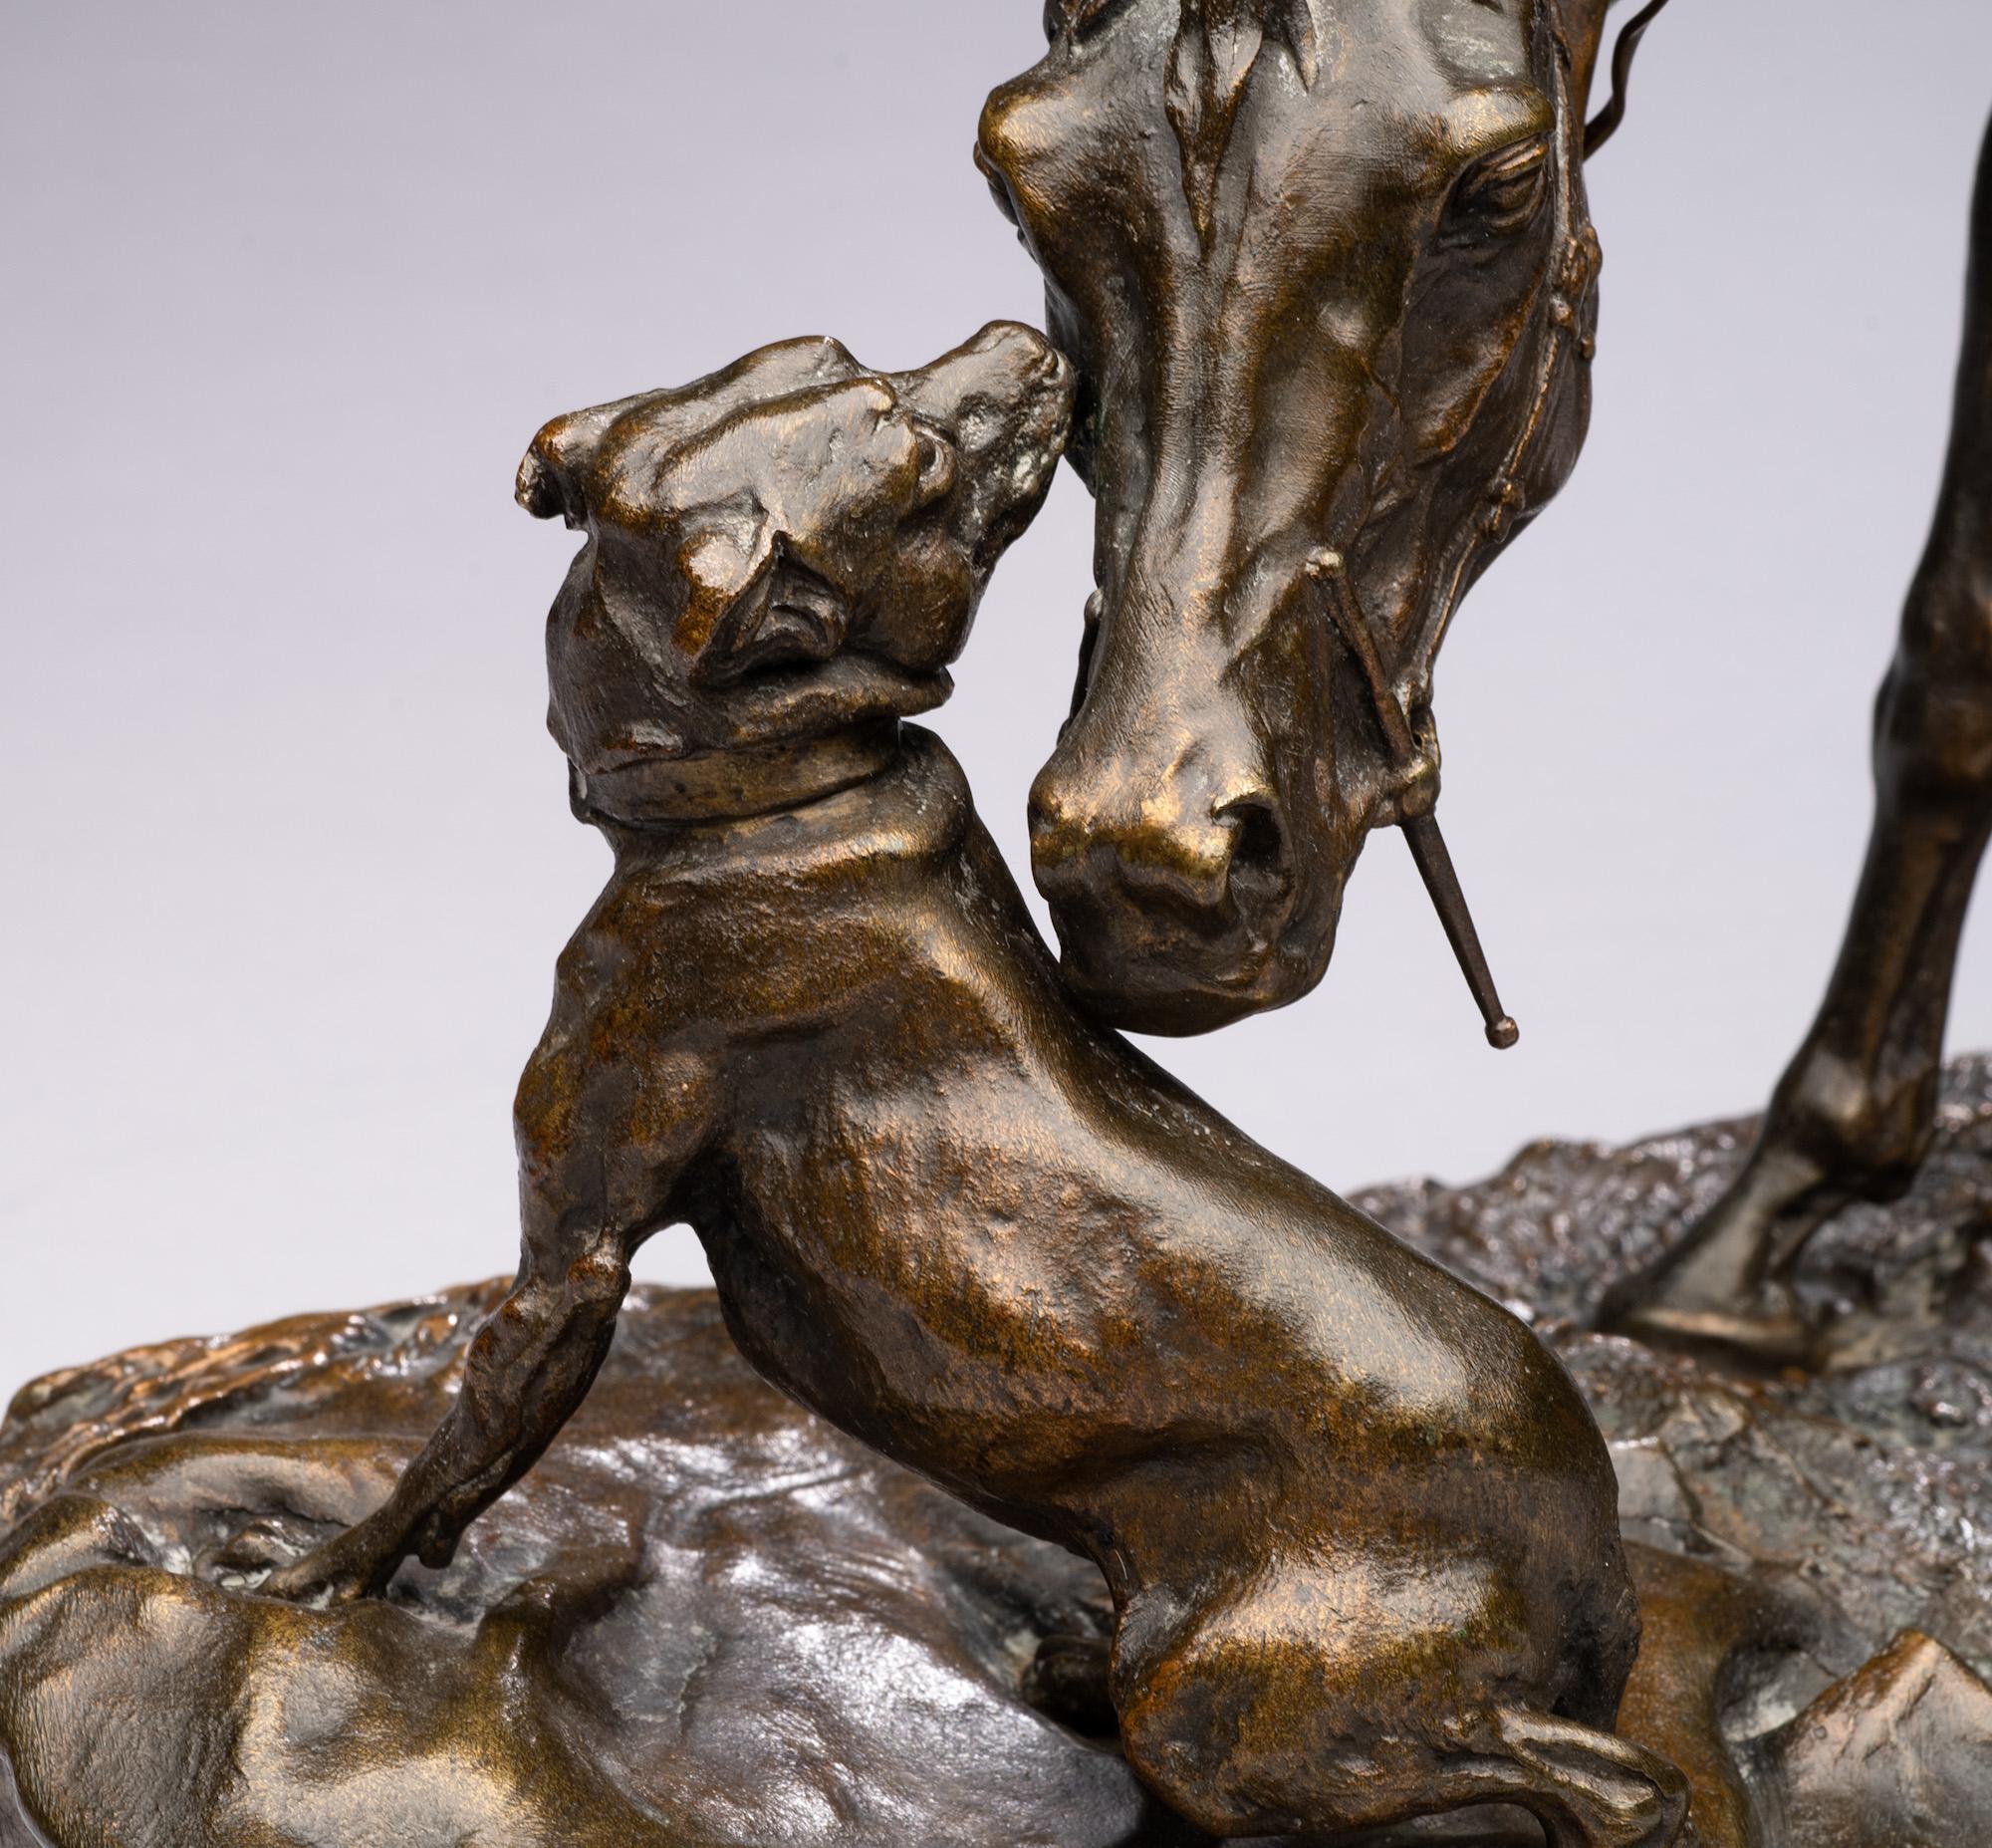 Antique: Mare Playing with a Terrier Dog (Good Companions) P. J. Mene 1860 - Sculpture by Pierre-Jules Mêne